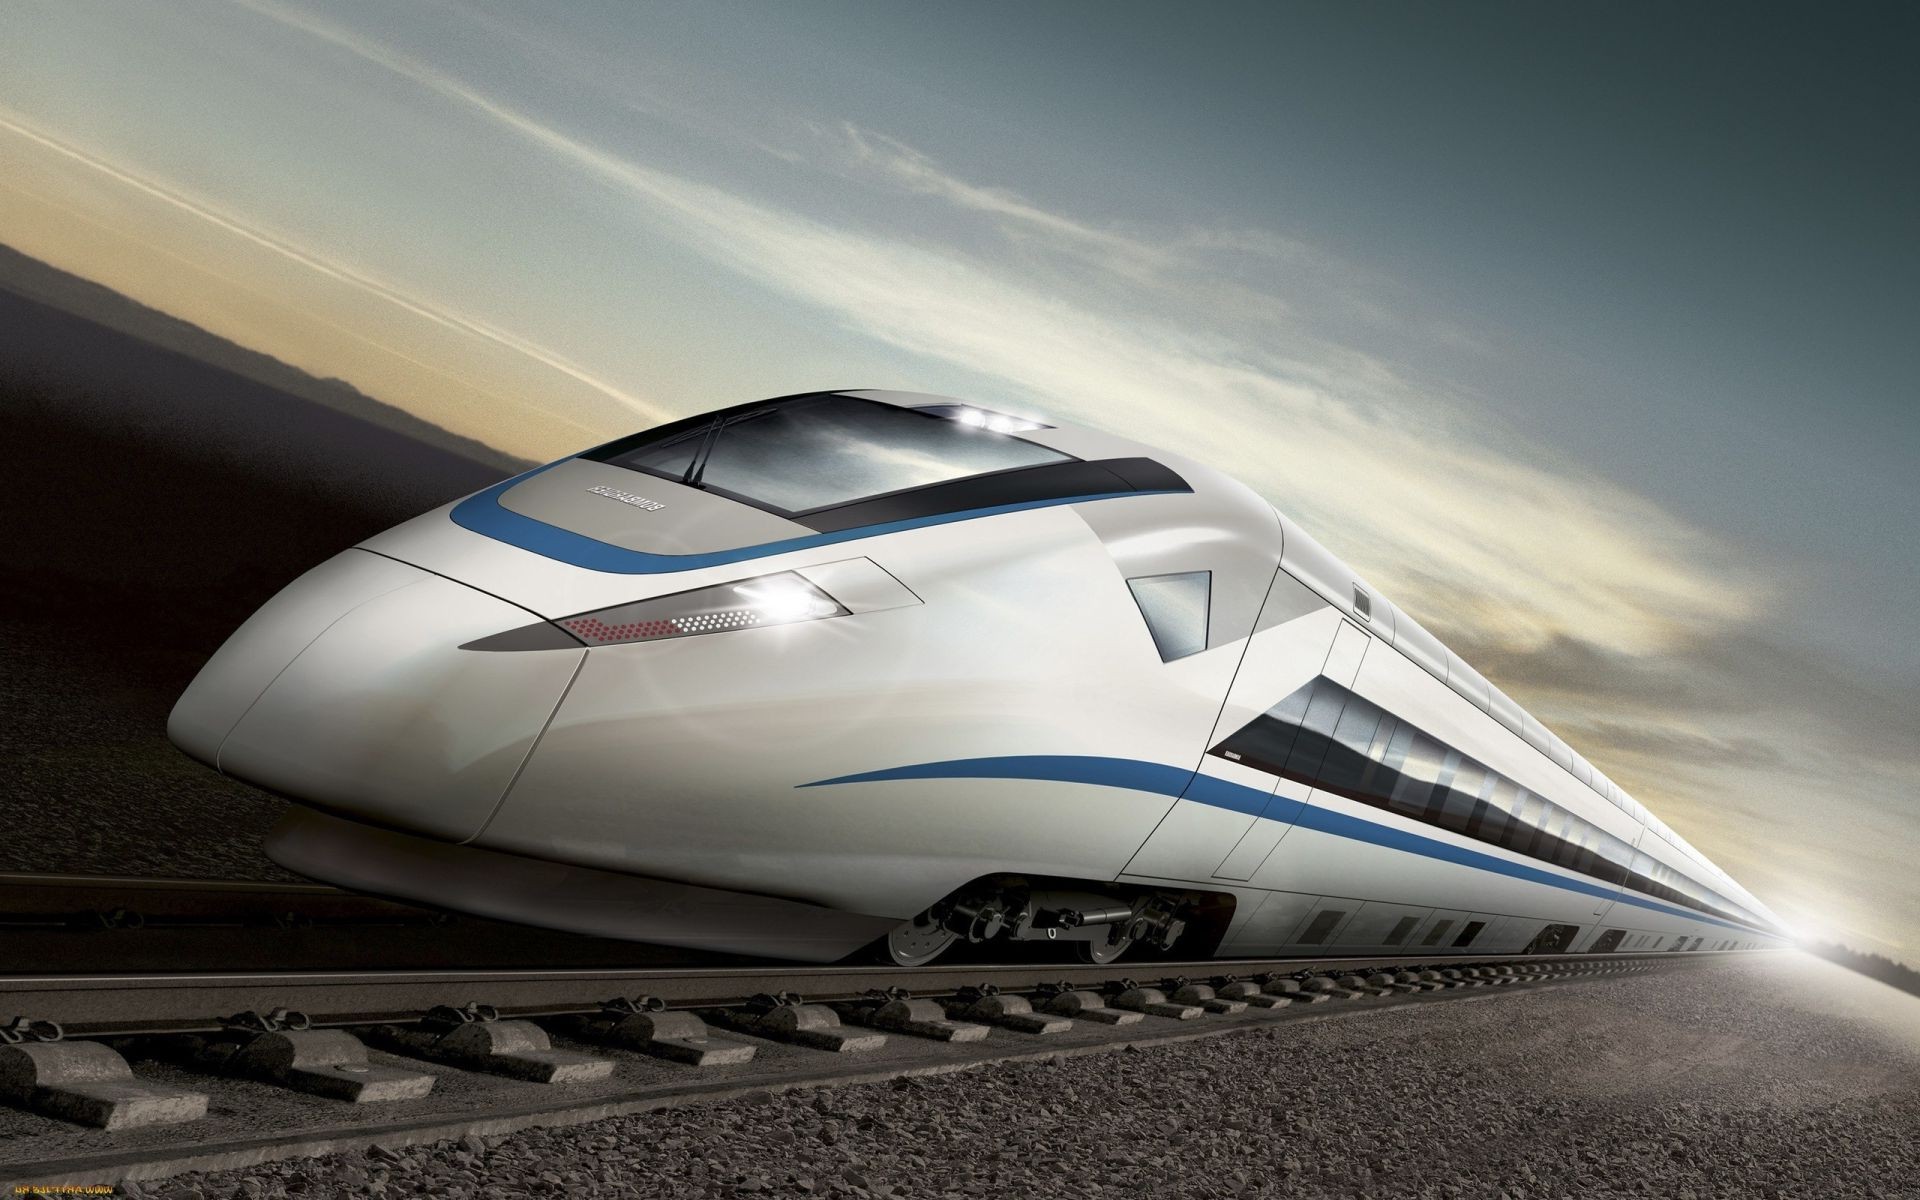 trains transportation system travel vehicle fast track engine sky speed business